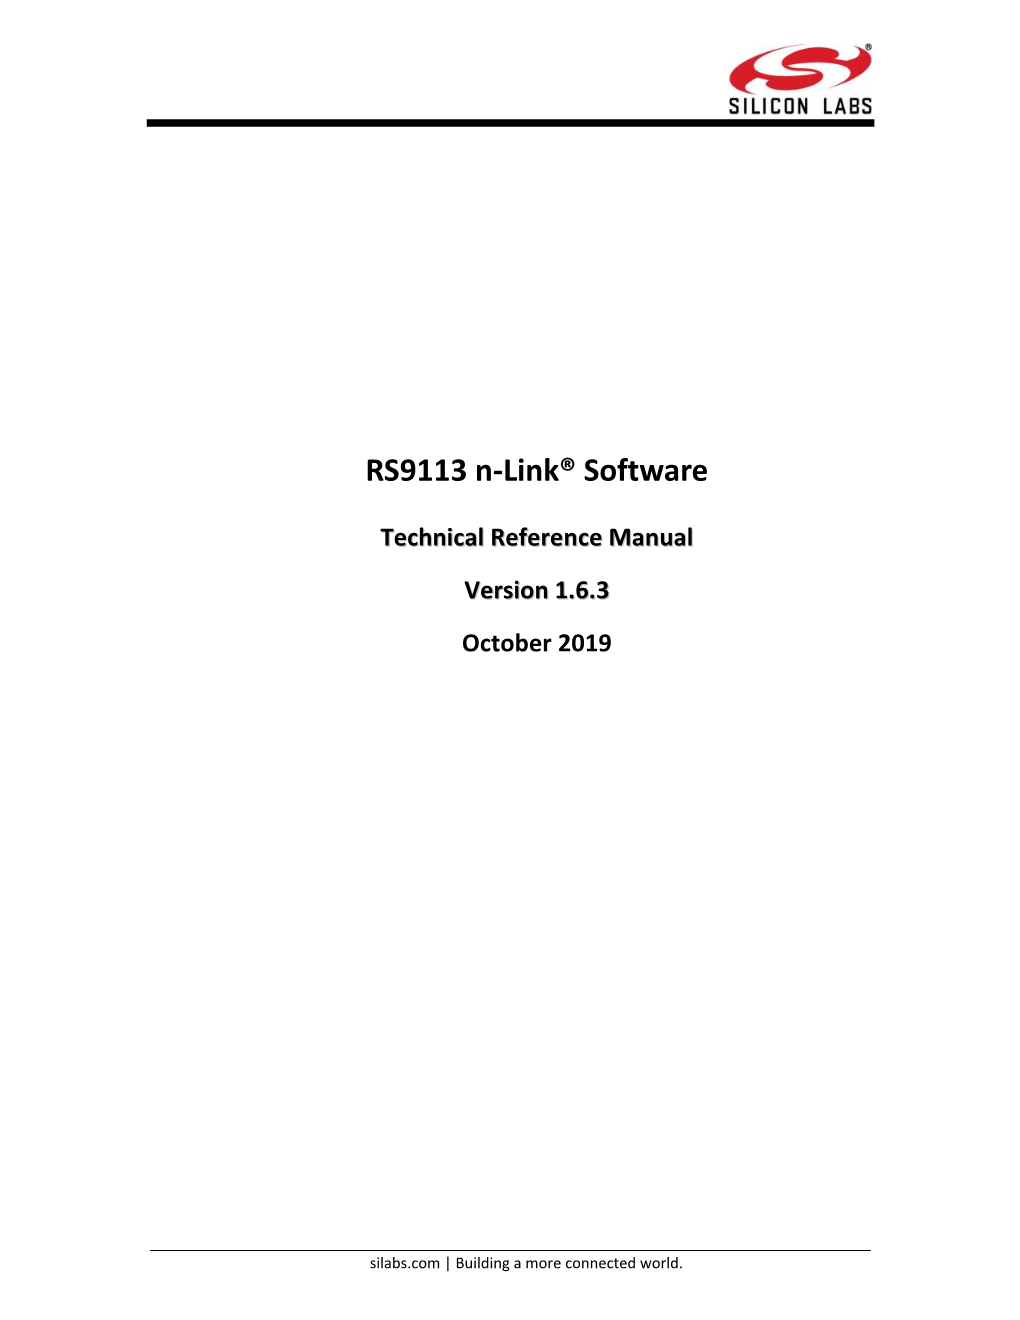 RS9113 N-Link Software Technical Reference Manual